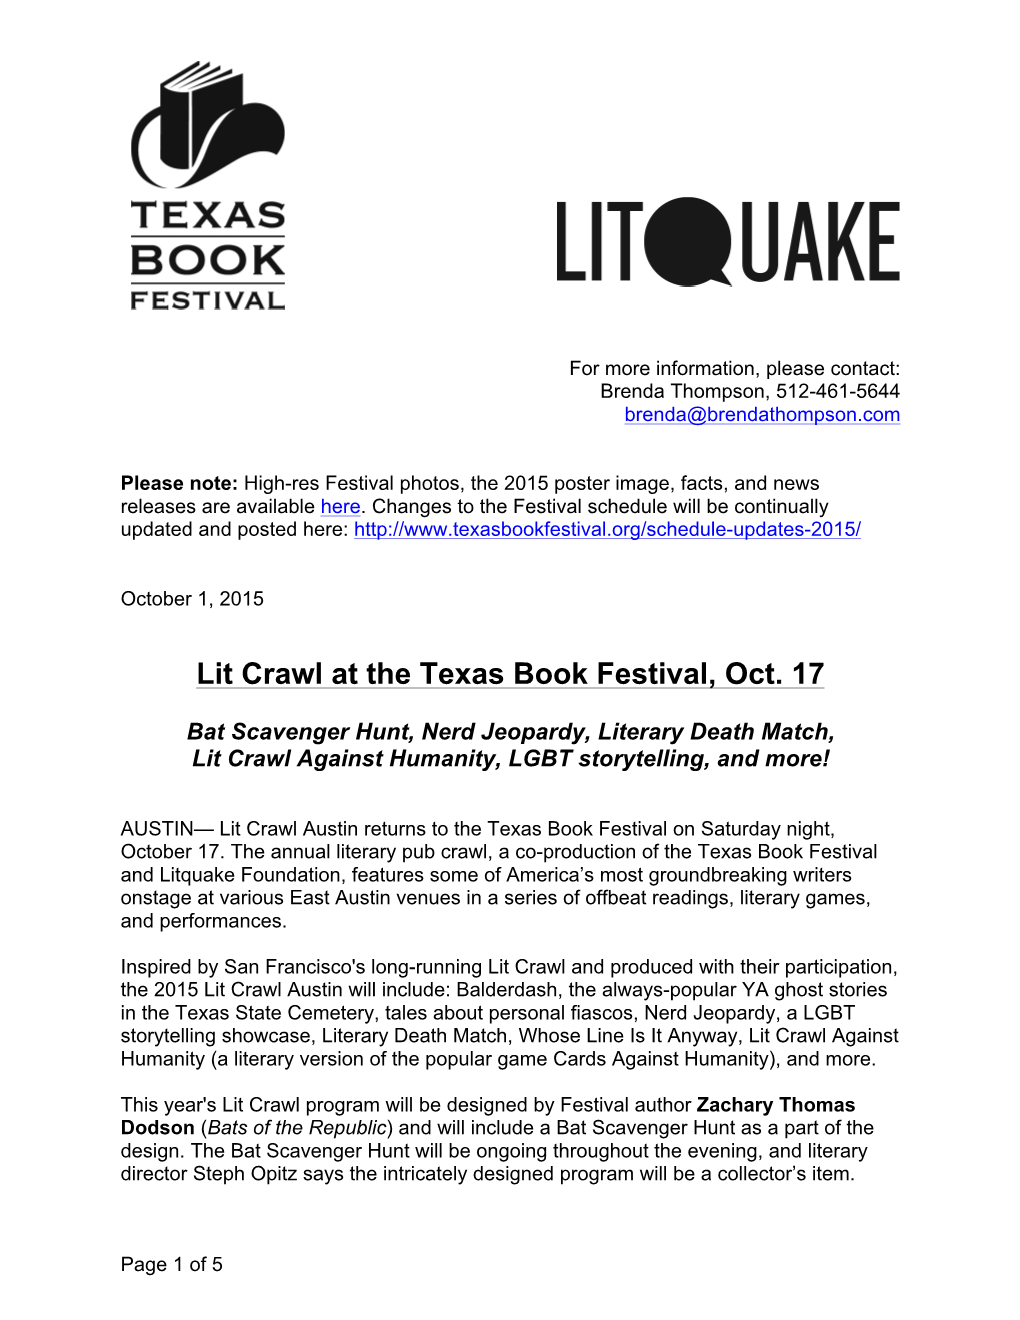 Lit Crawl at the Texas Book Festival, Oct. 17